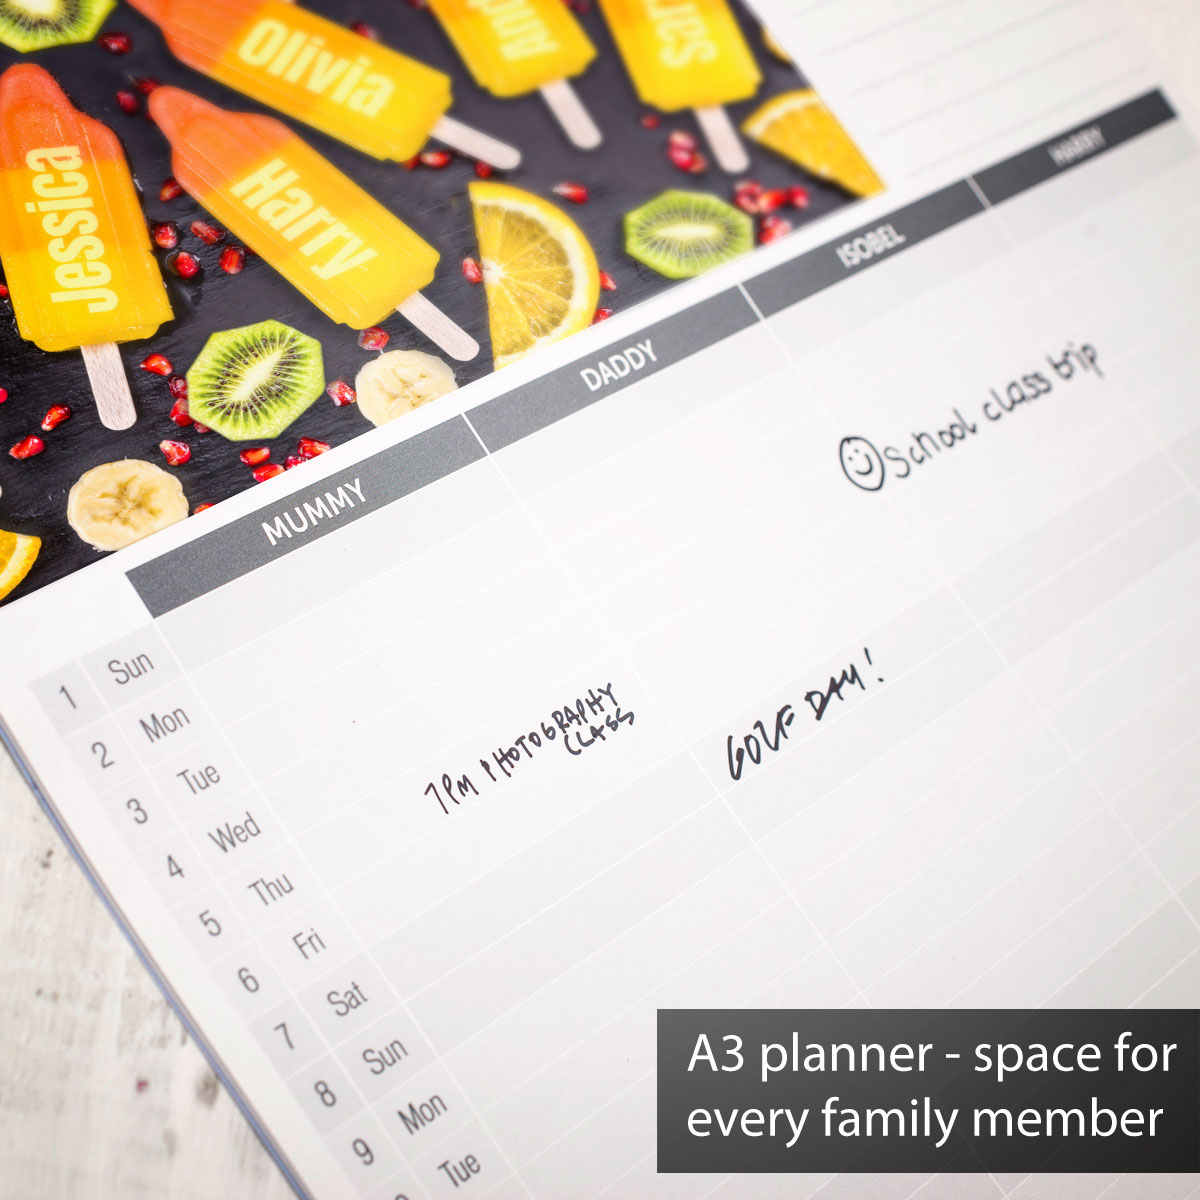 Personalised A3 Planner Calendar - Our Family, 8th Edition